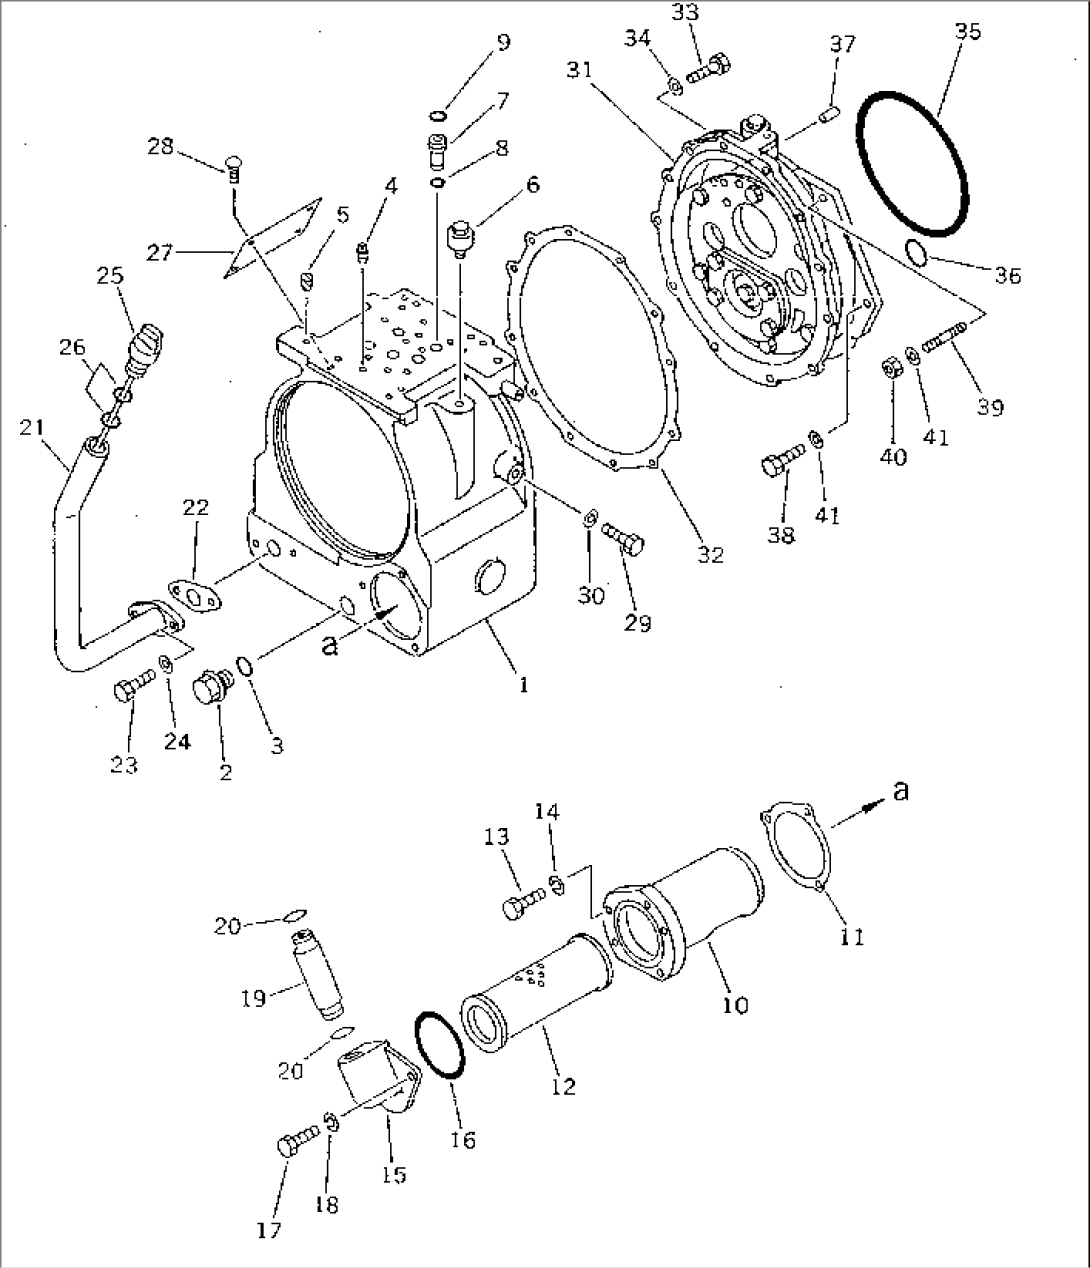 TRANSMISSION (F2-R2) (CASE) (1/6) (FOR MONO LEVER STEERING)